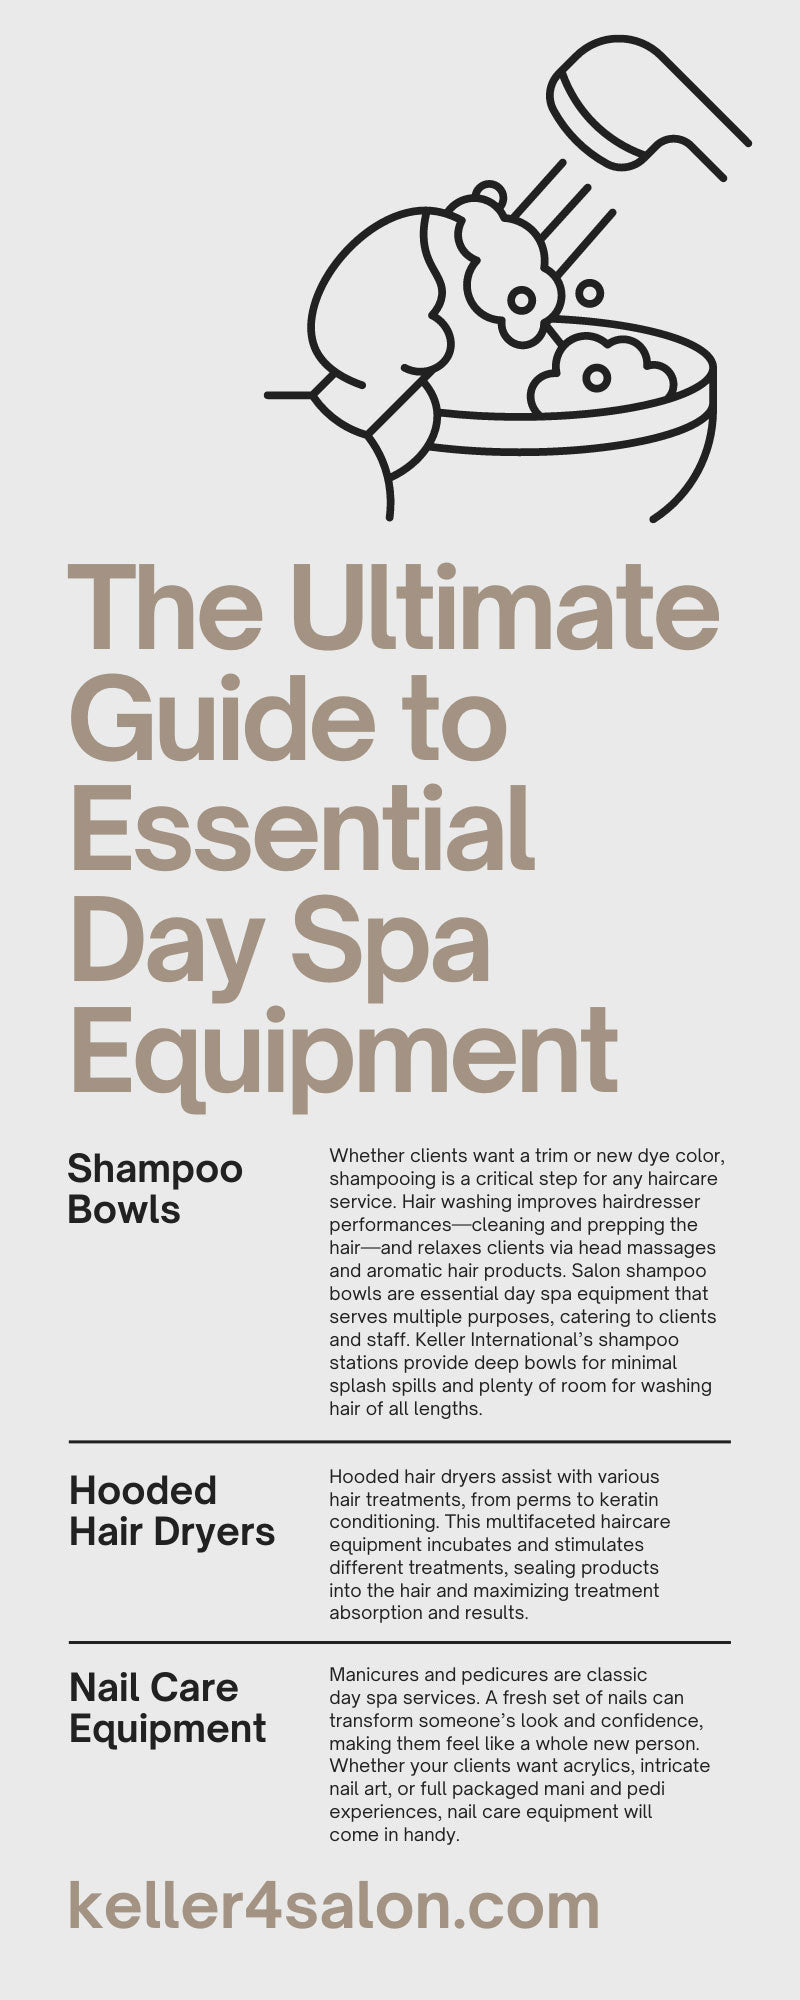 The Ultimate Guide to Essential Day Spa Equipment